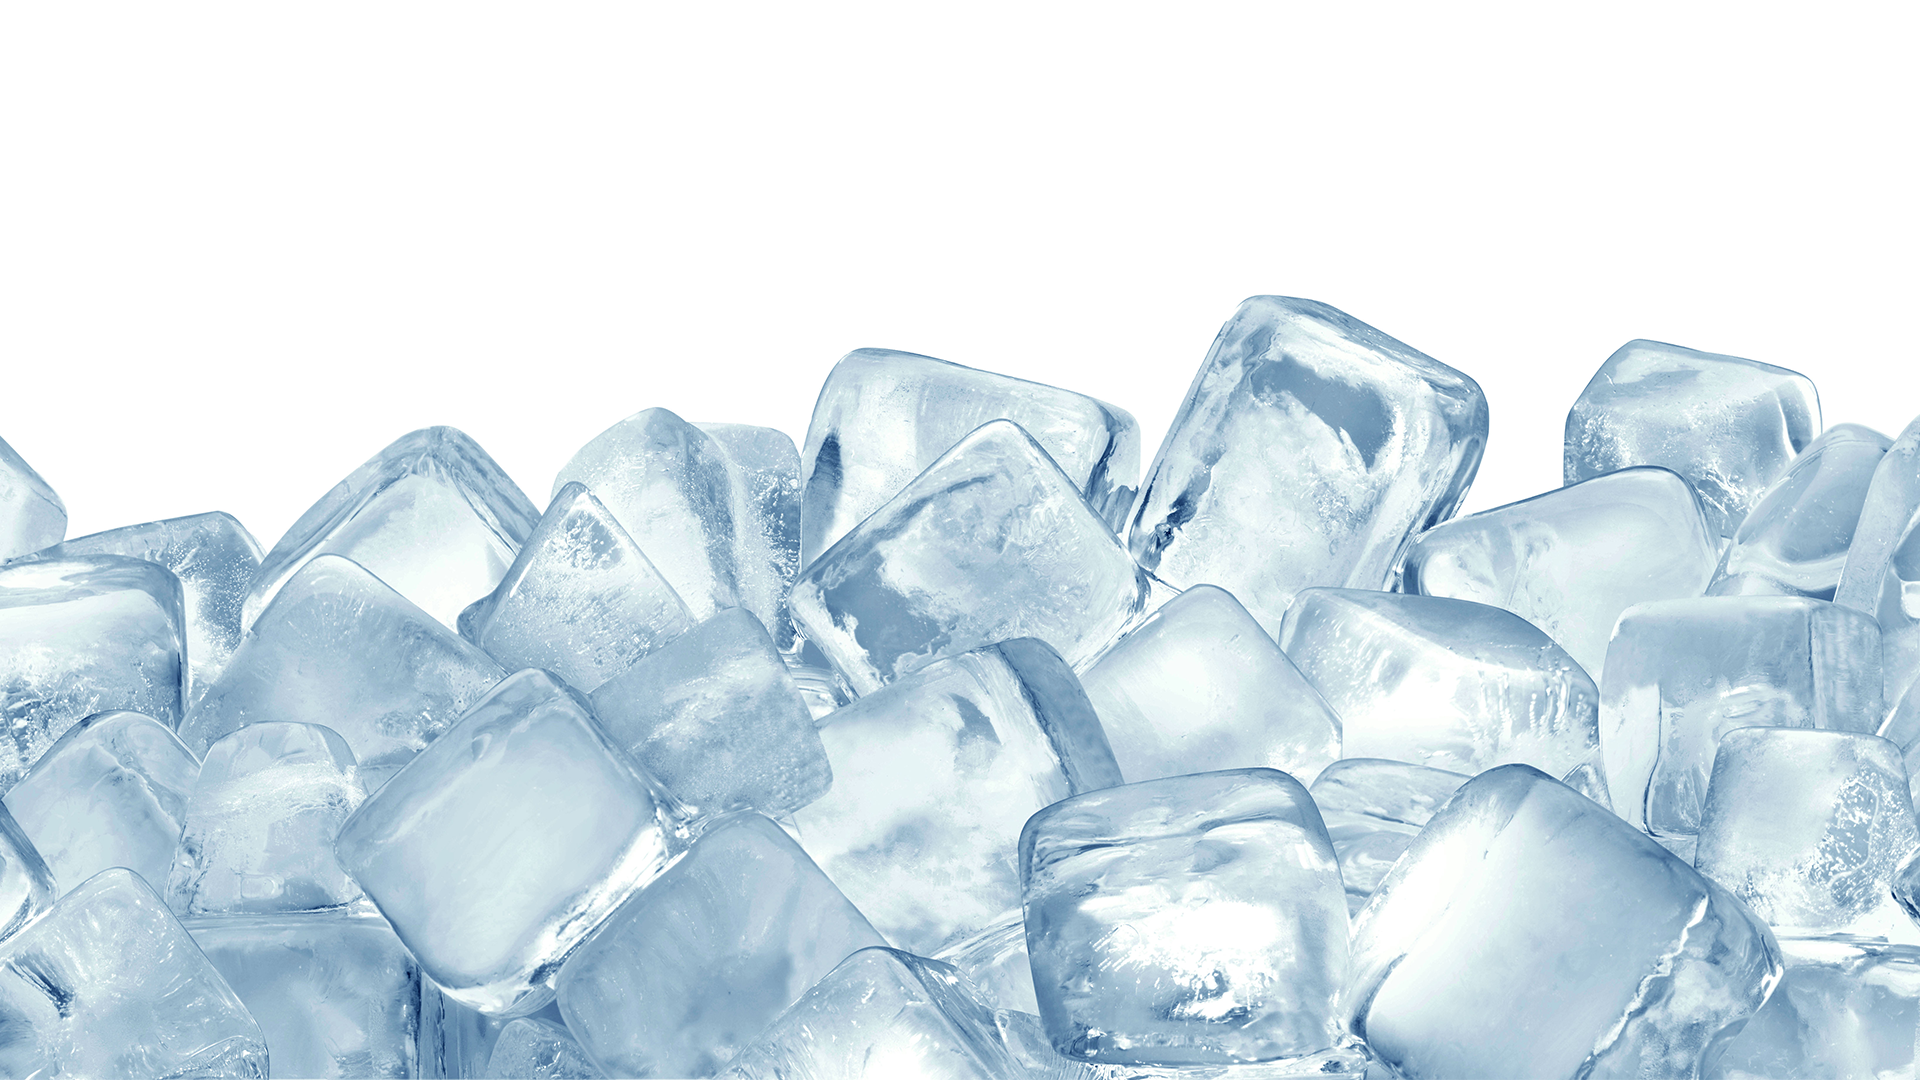 What is the Ice Hack for weight loss?